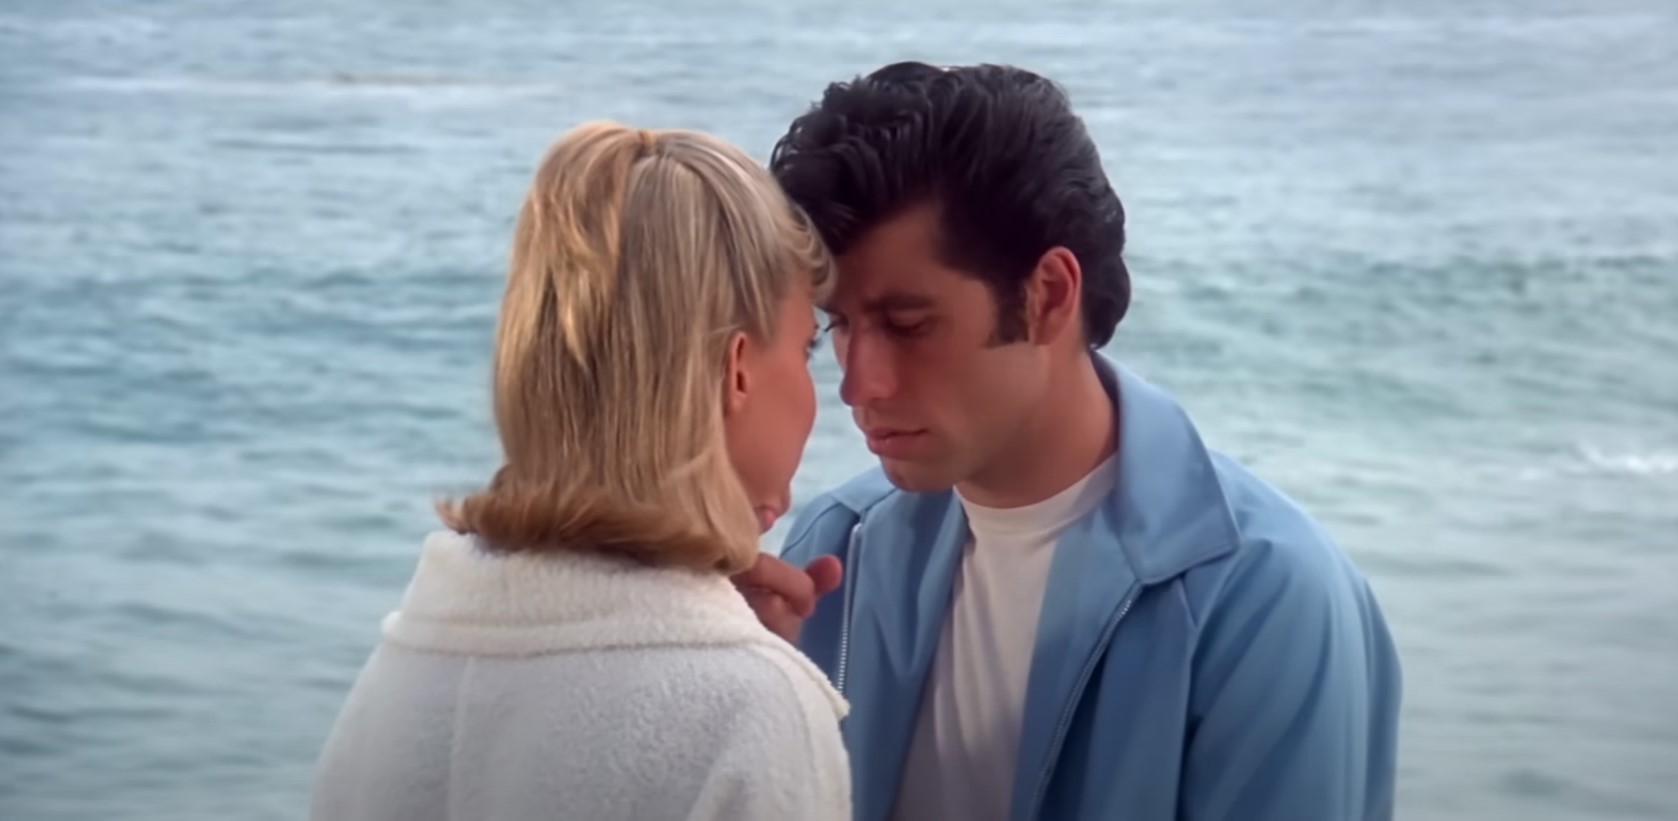 Is Grease (1978) Based on a True Story?